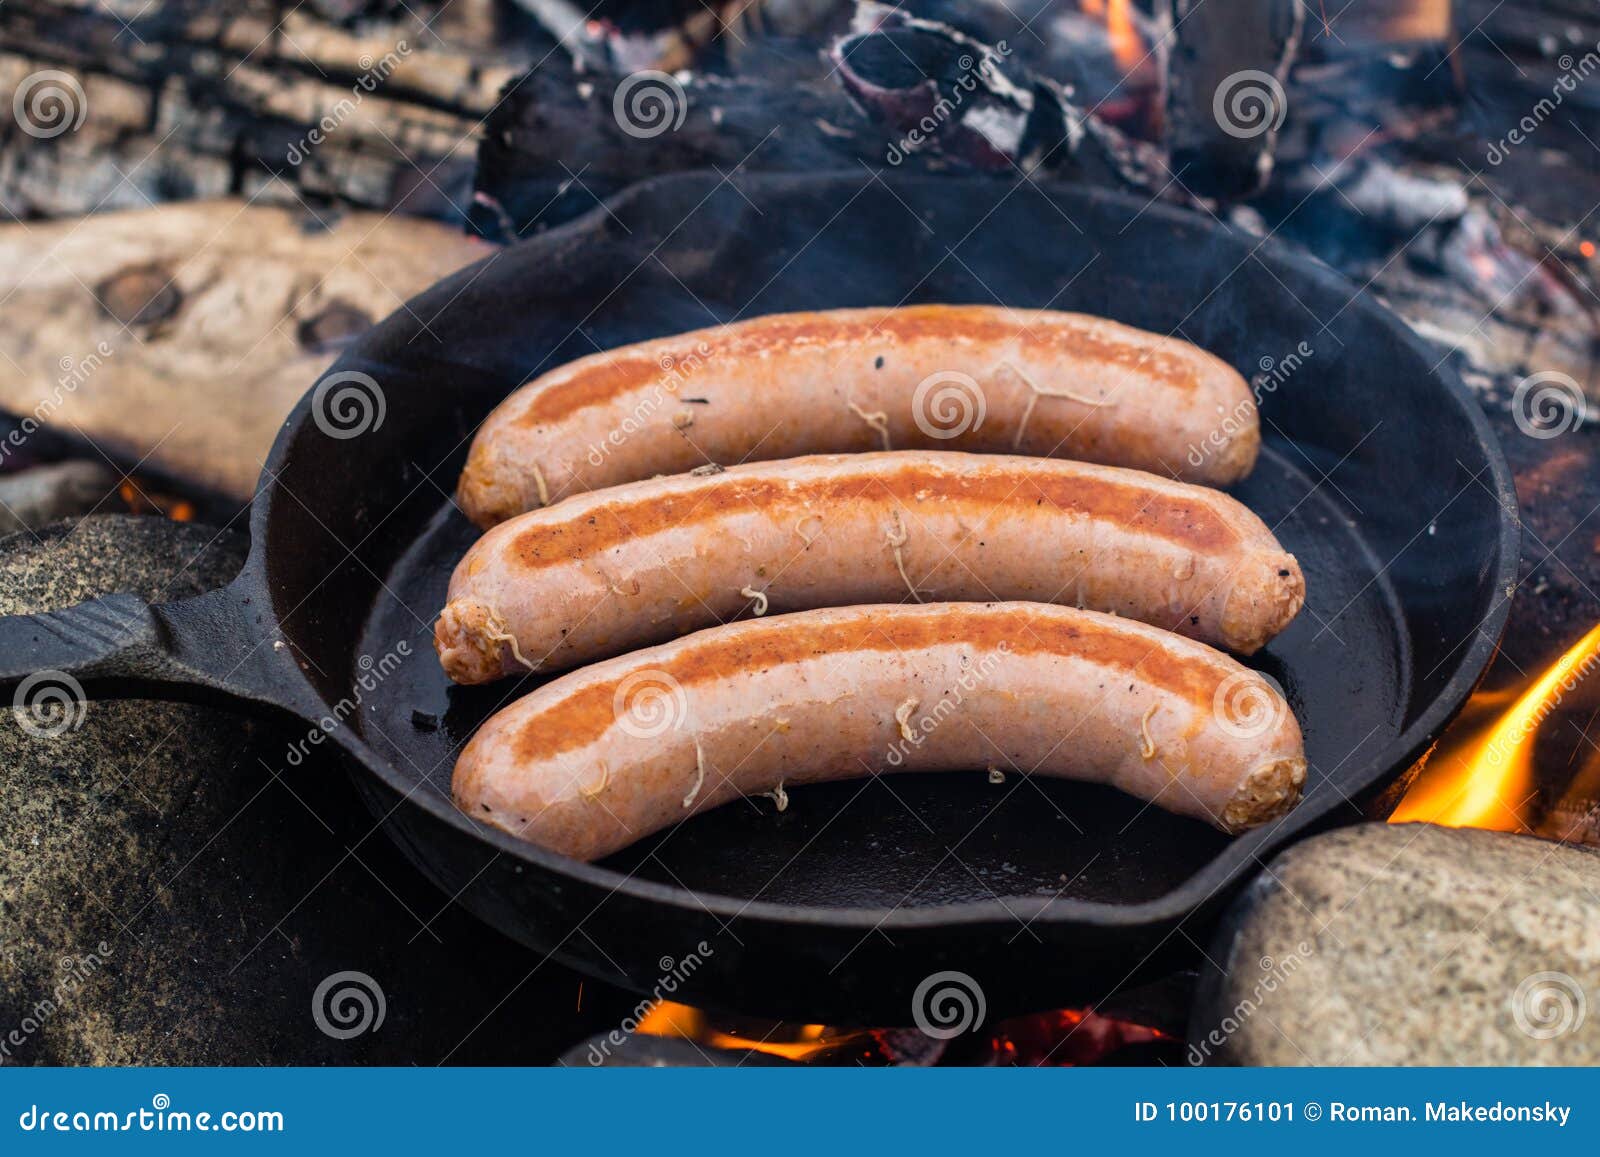 https://thumbs.dreamstime.com/z/live-fire-cooking-juicy-sausages-over-campfire-cooking-sausages-cast-iron-skillet-campfire-camping-good-positive-100176101.jpg